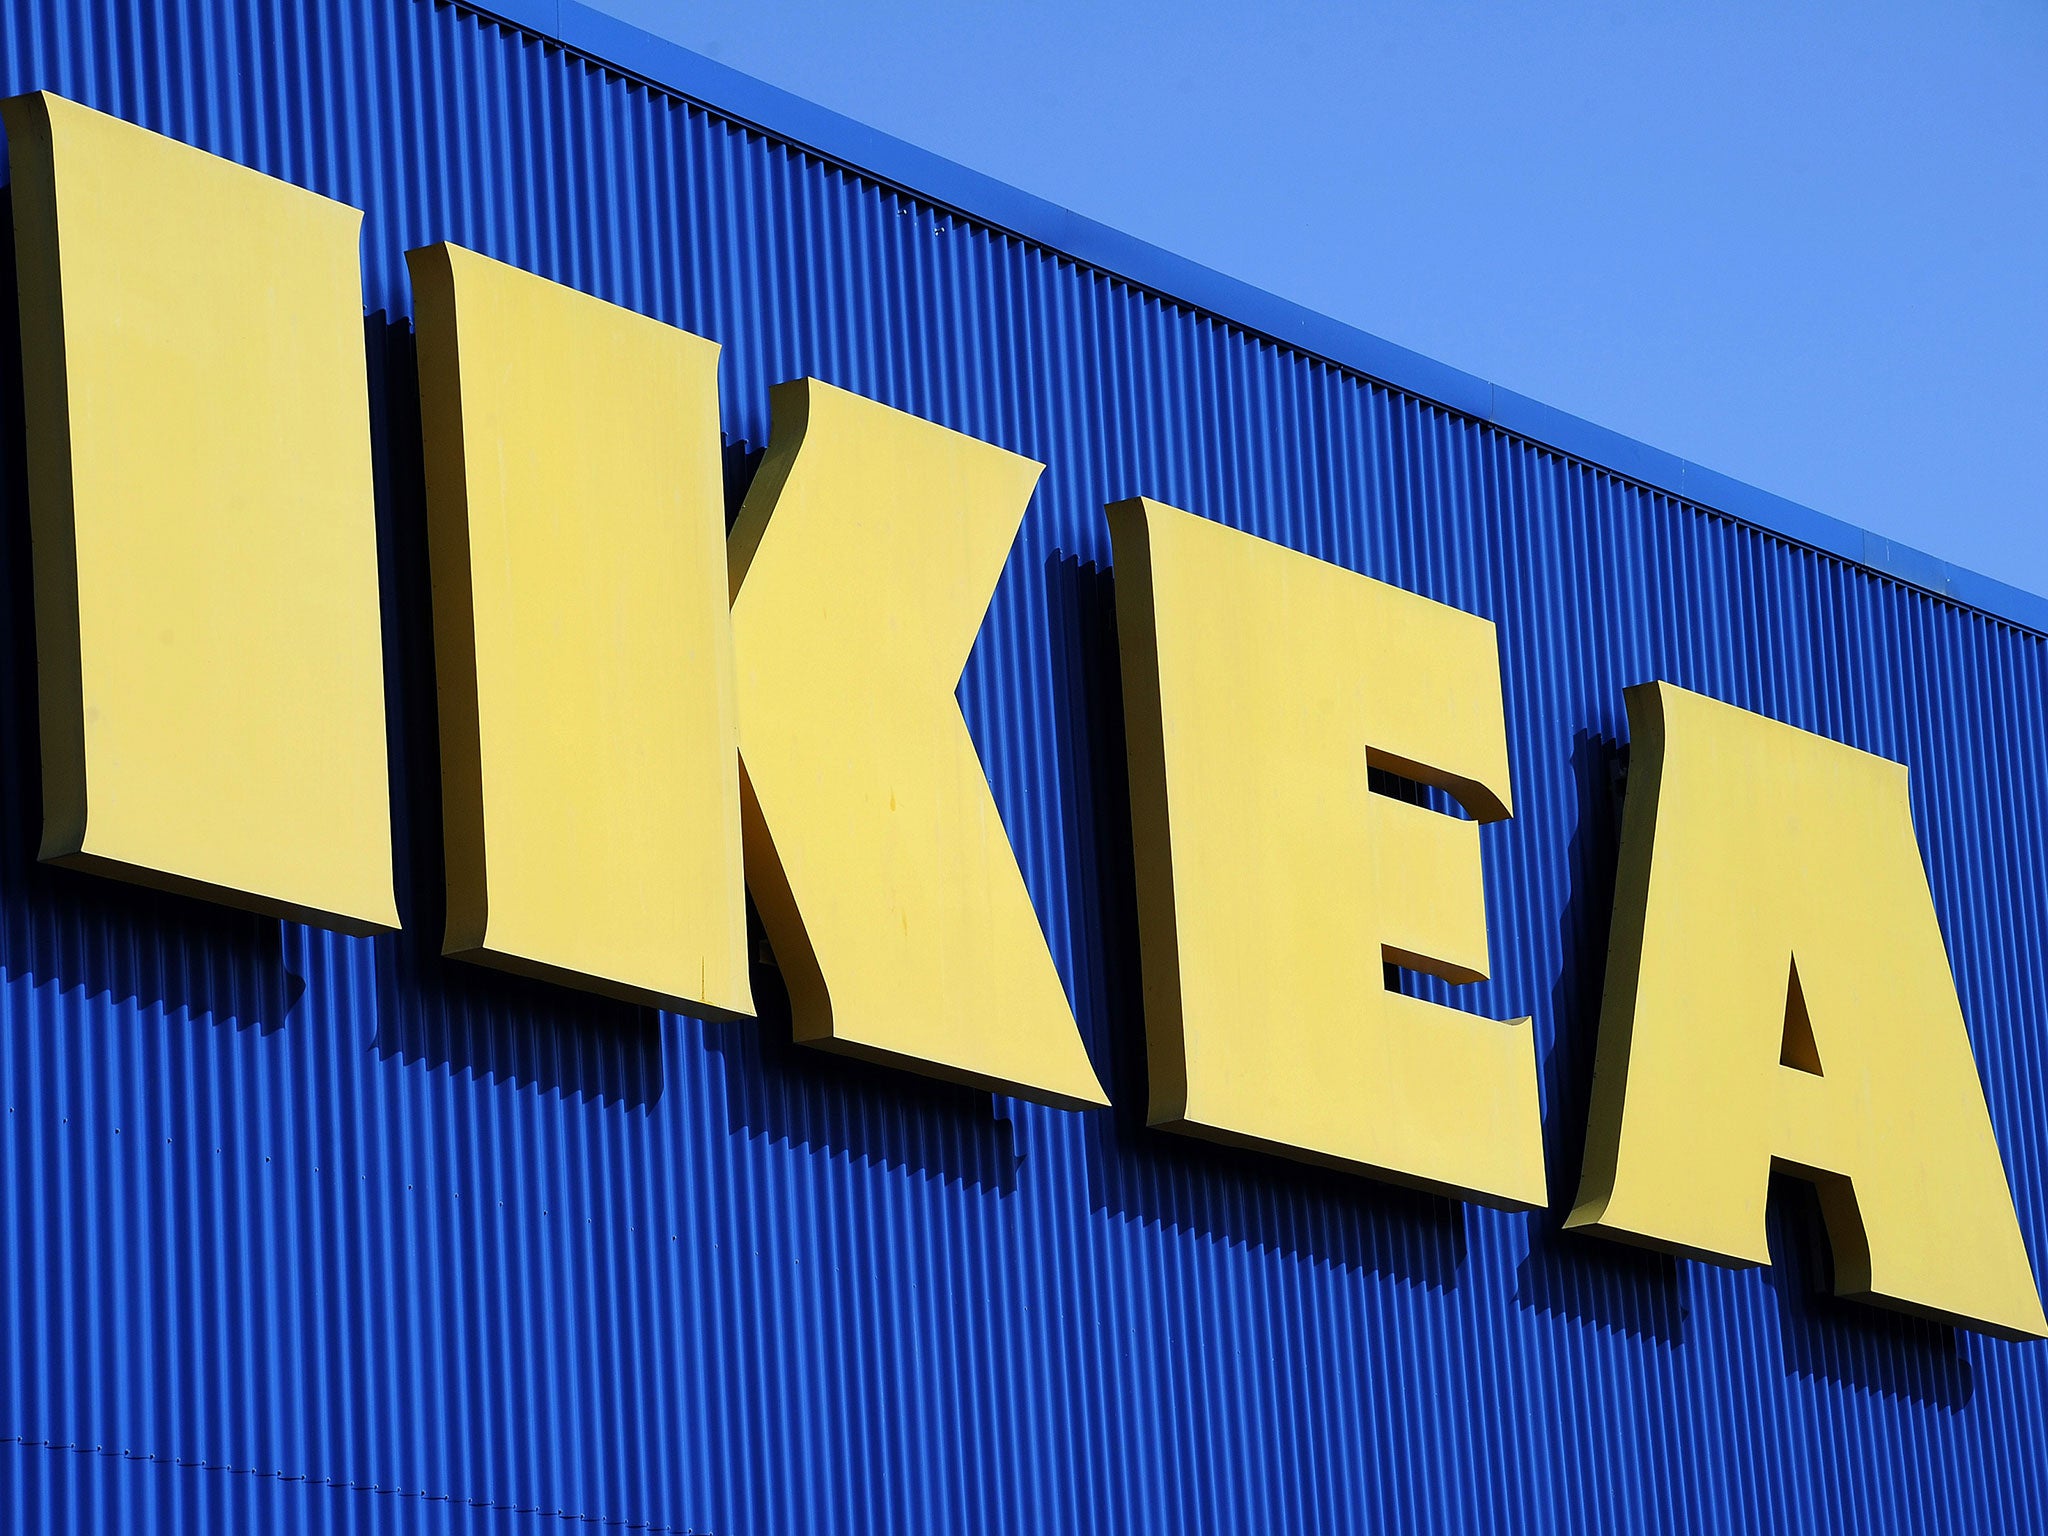 Ikea has issued a safety warning with the CPSC